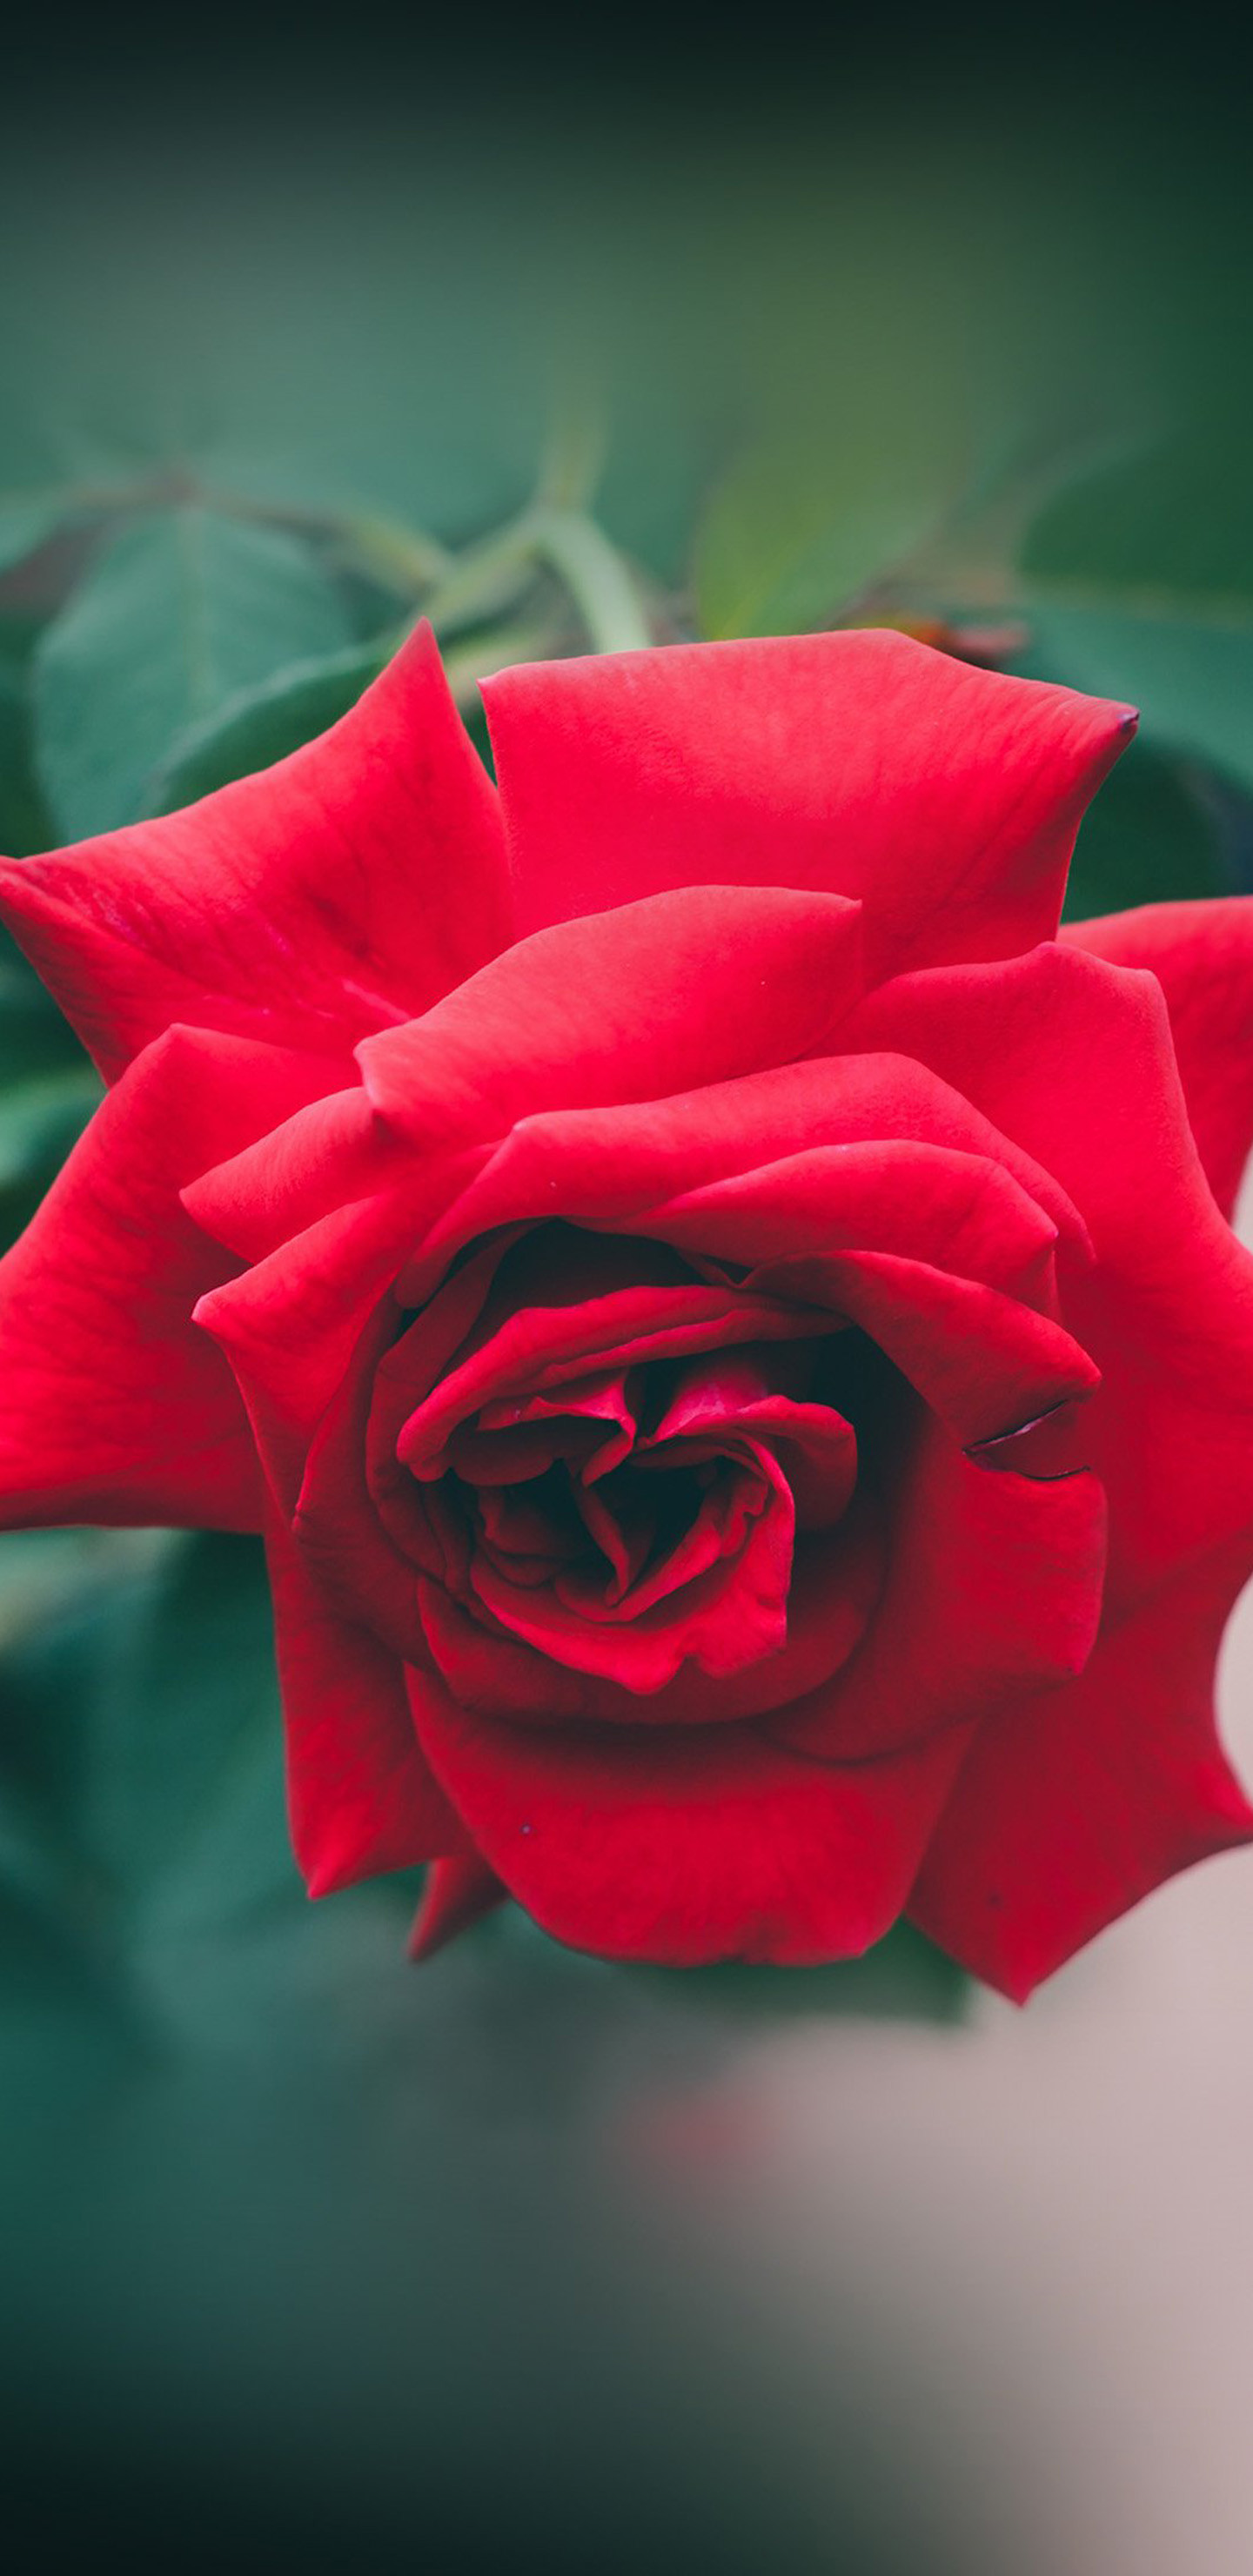 1440x2960 Red Rose Love – Valentines Day Galaxy Note 8 Wallpaper